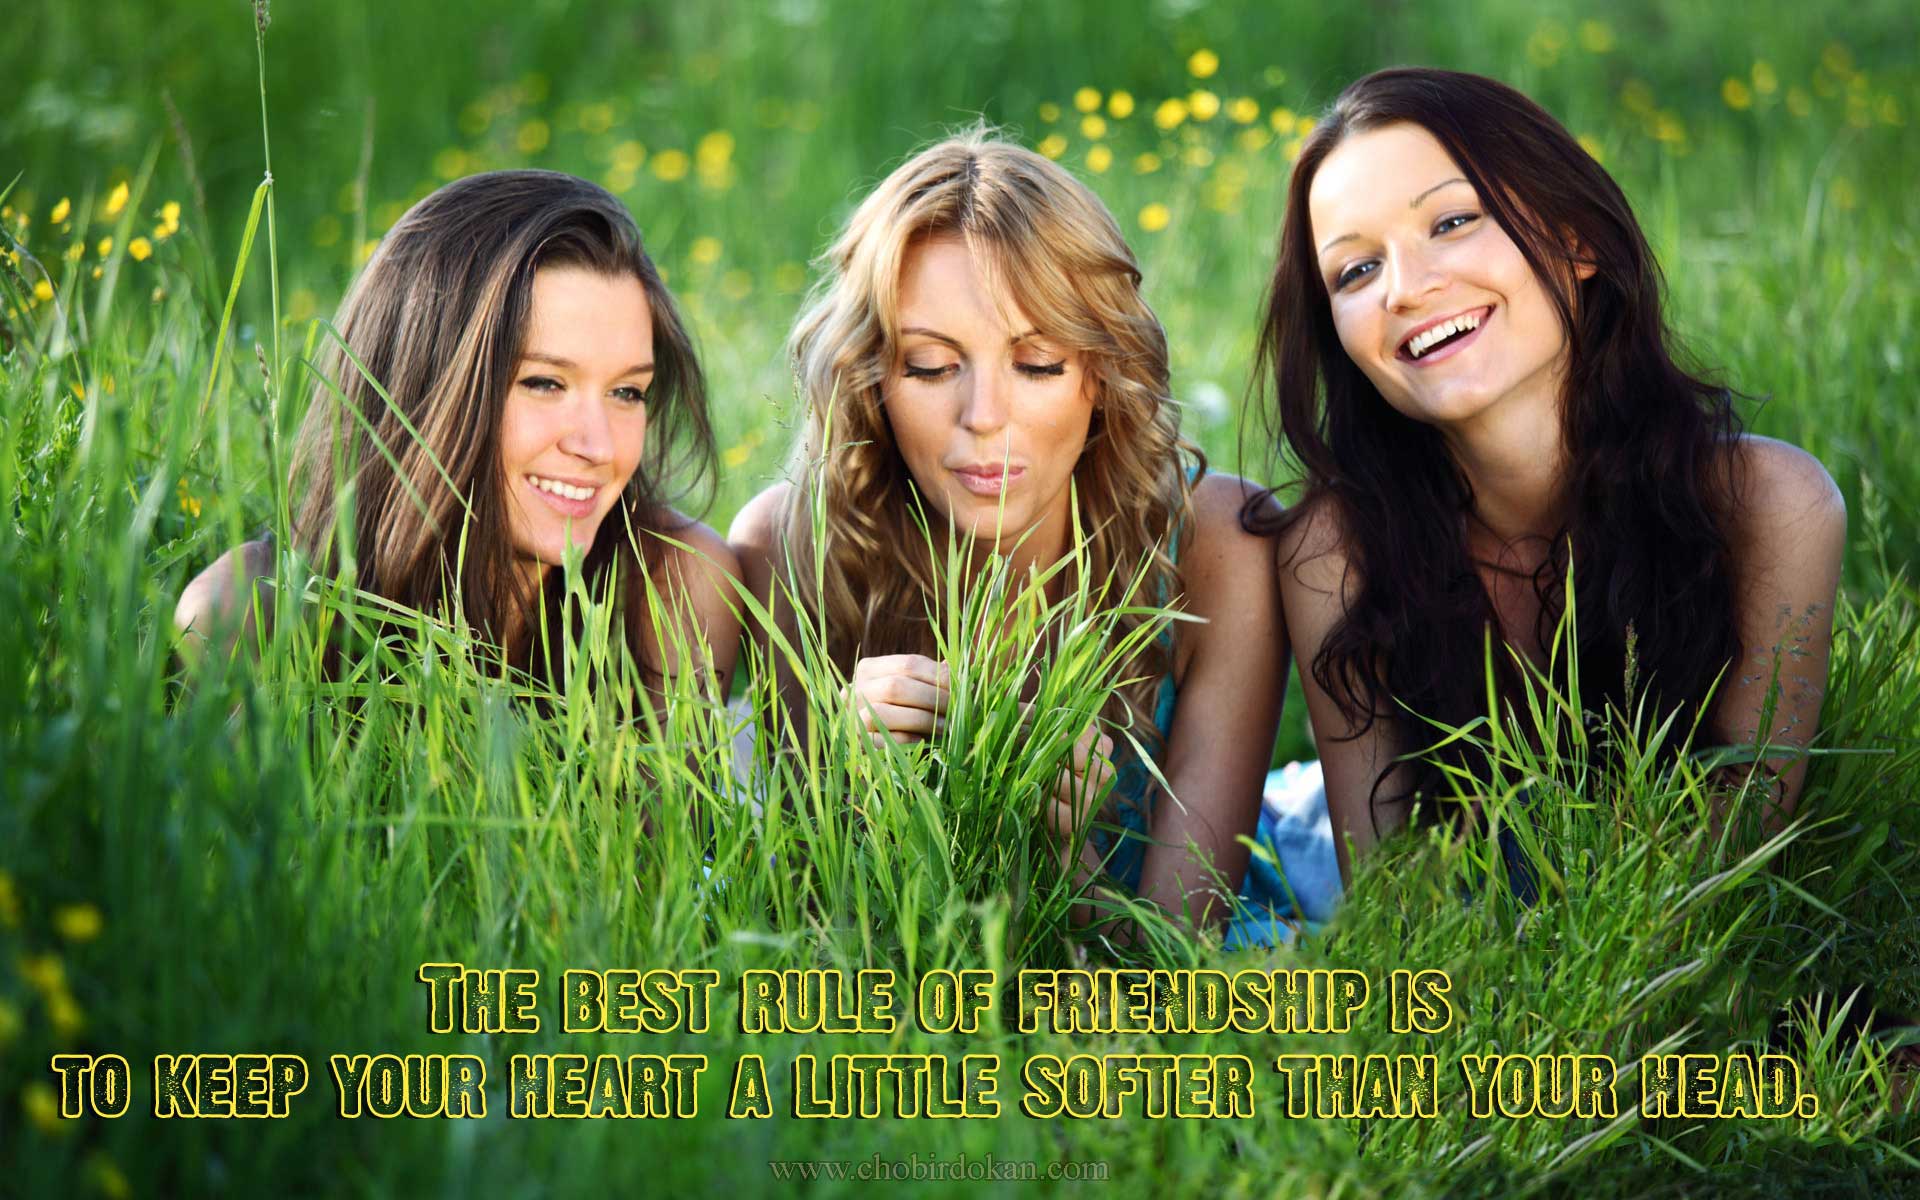 cute friendship wallpapers,people in nature,nature,grass,facial expression,smile